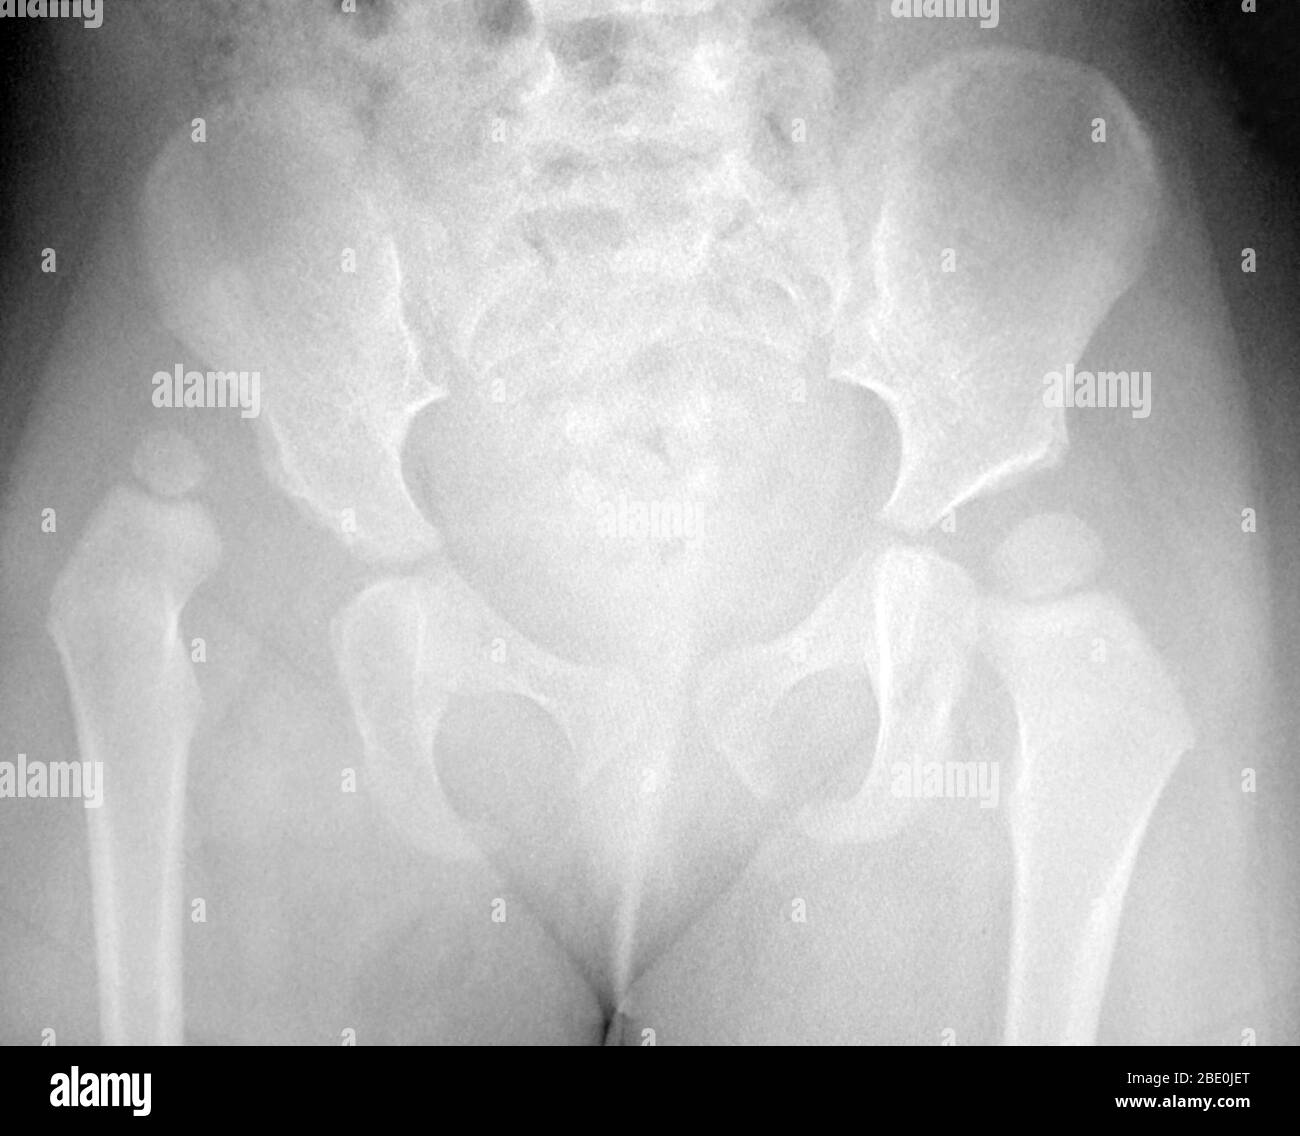 X-ray showing a dislocated right hip (on left of image) of a child. Stock Photo